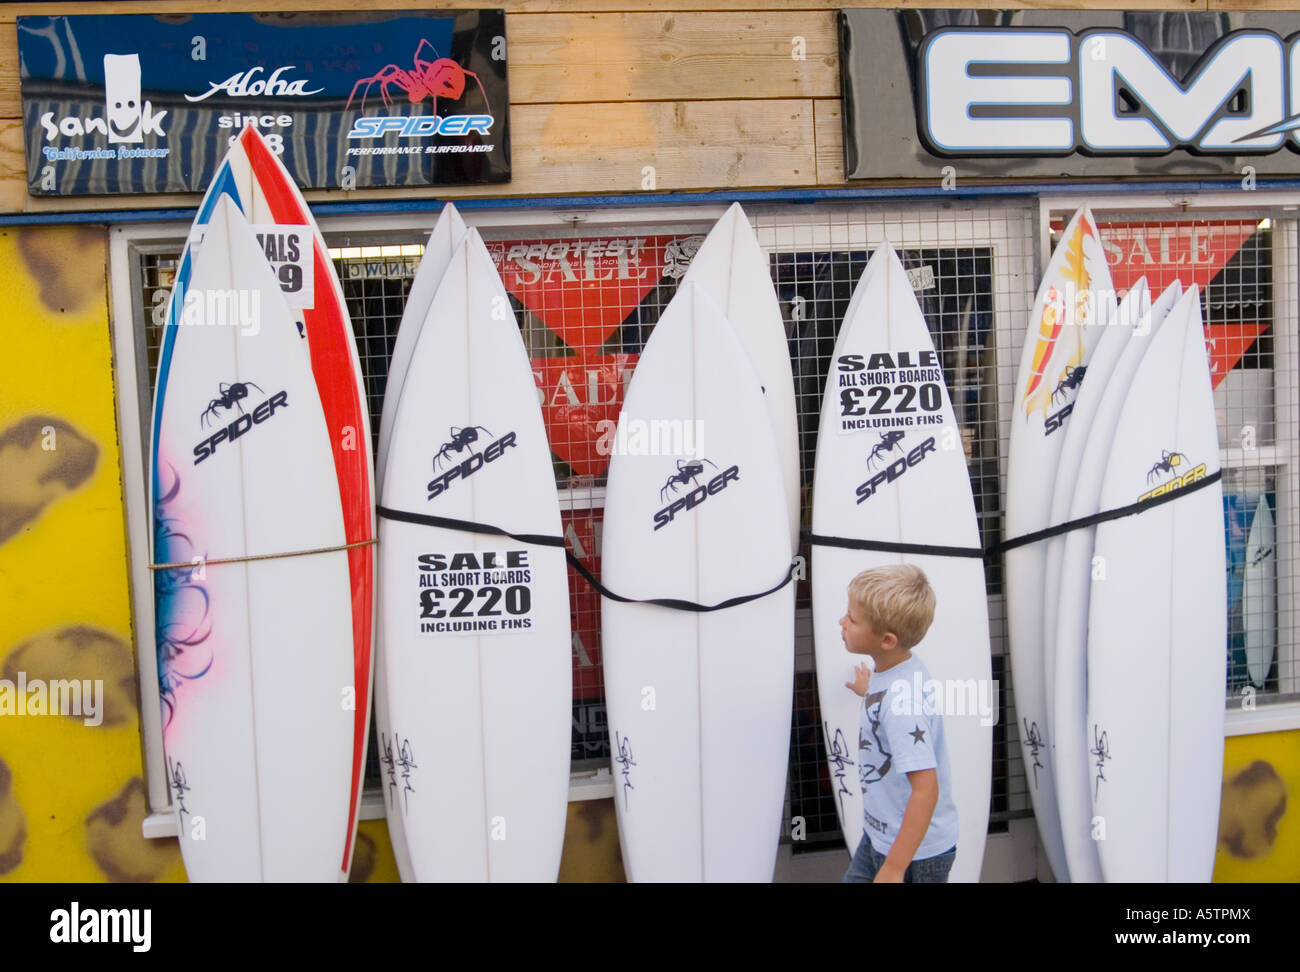 Young boy looks at surfboards outside shop, Newquay, Cornwall UK Stock Photo